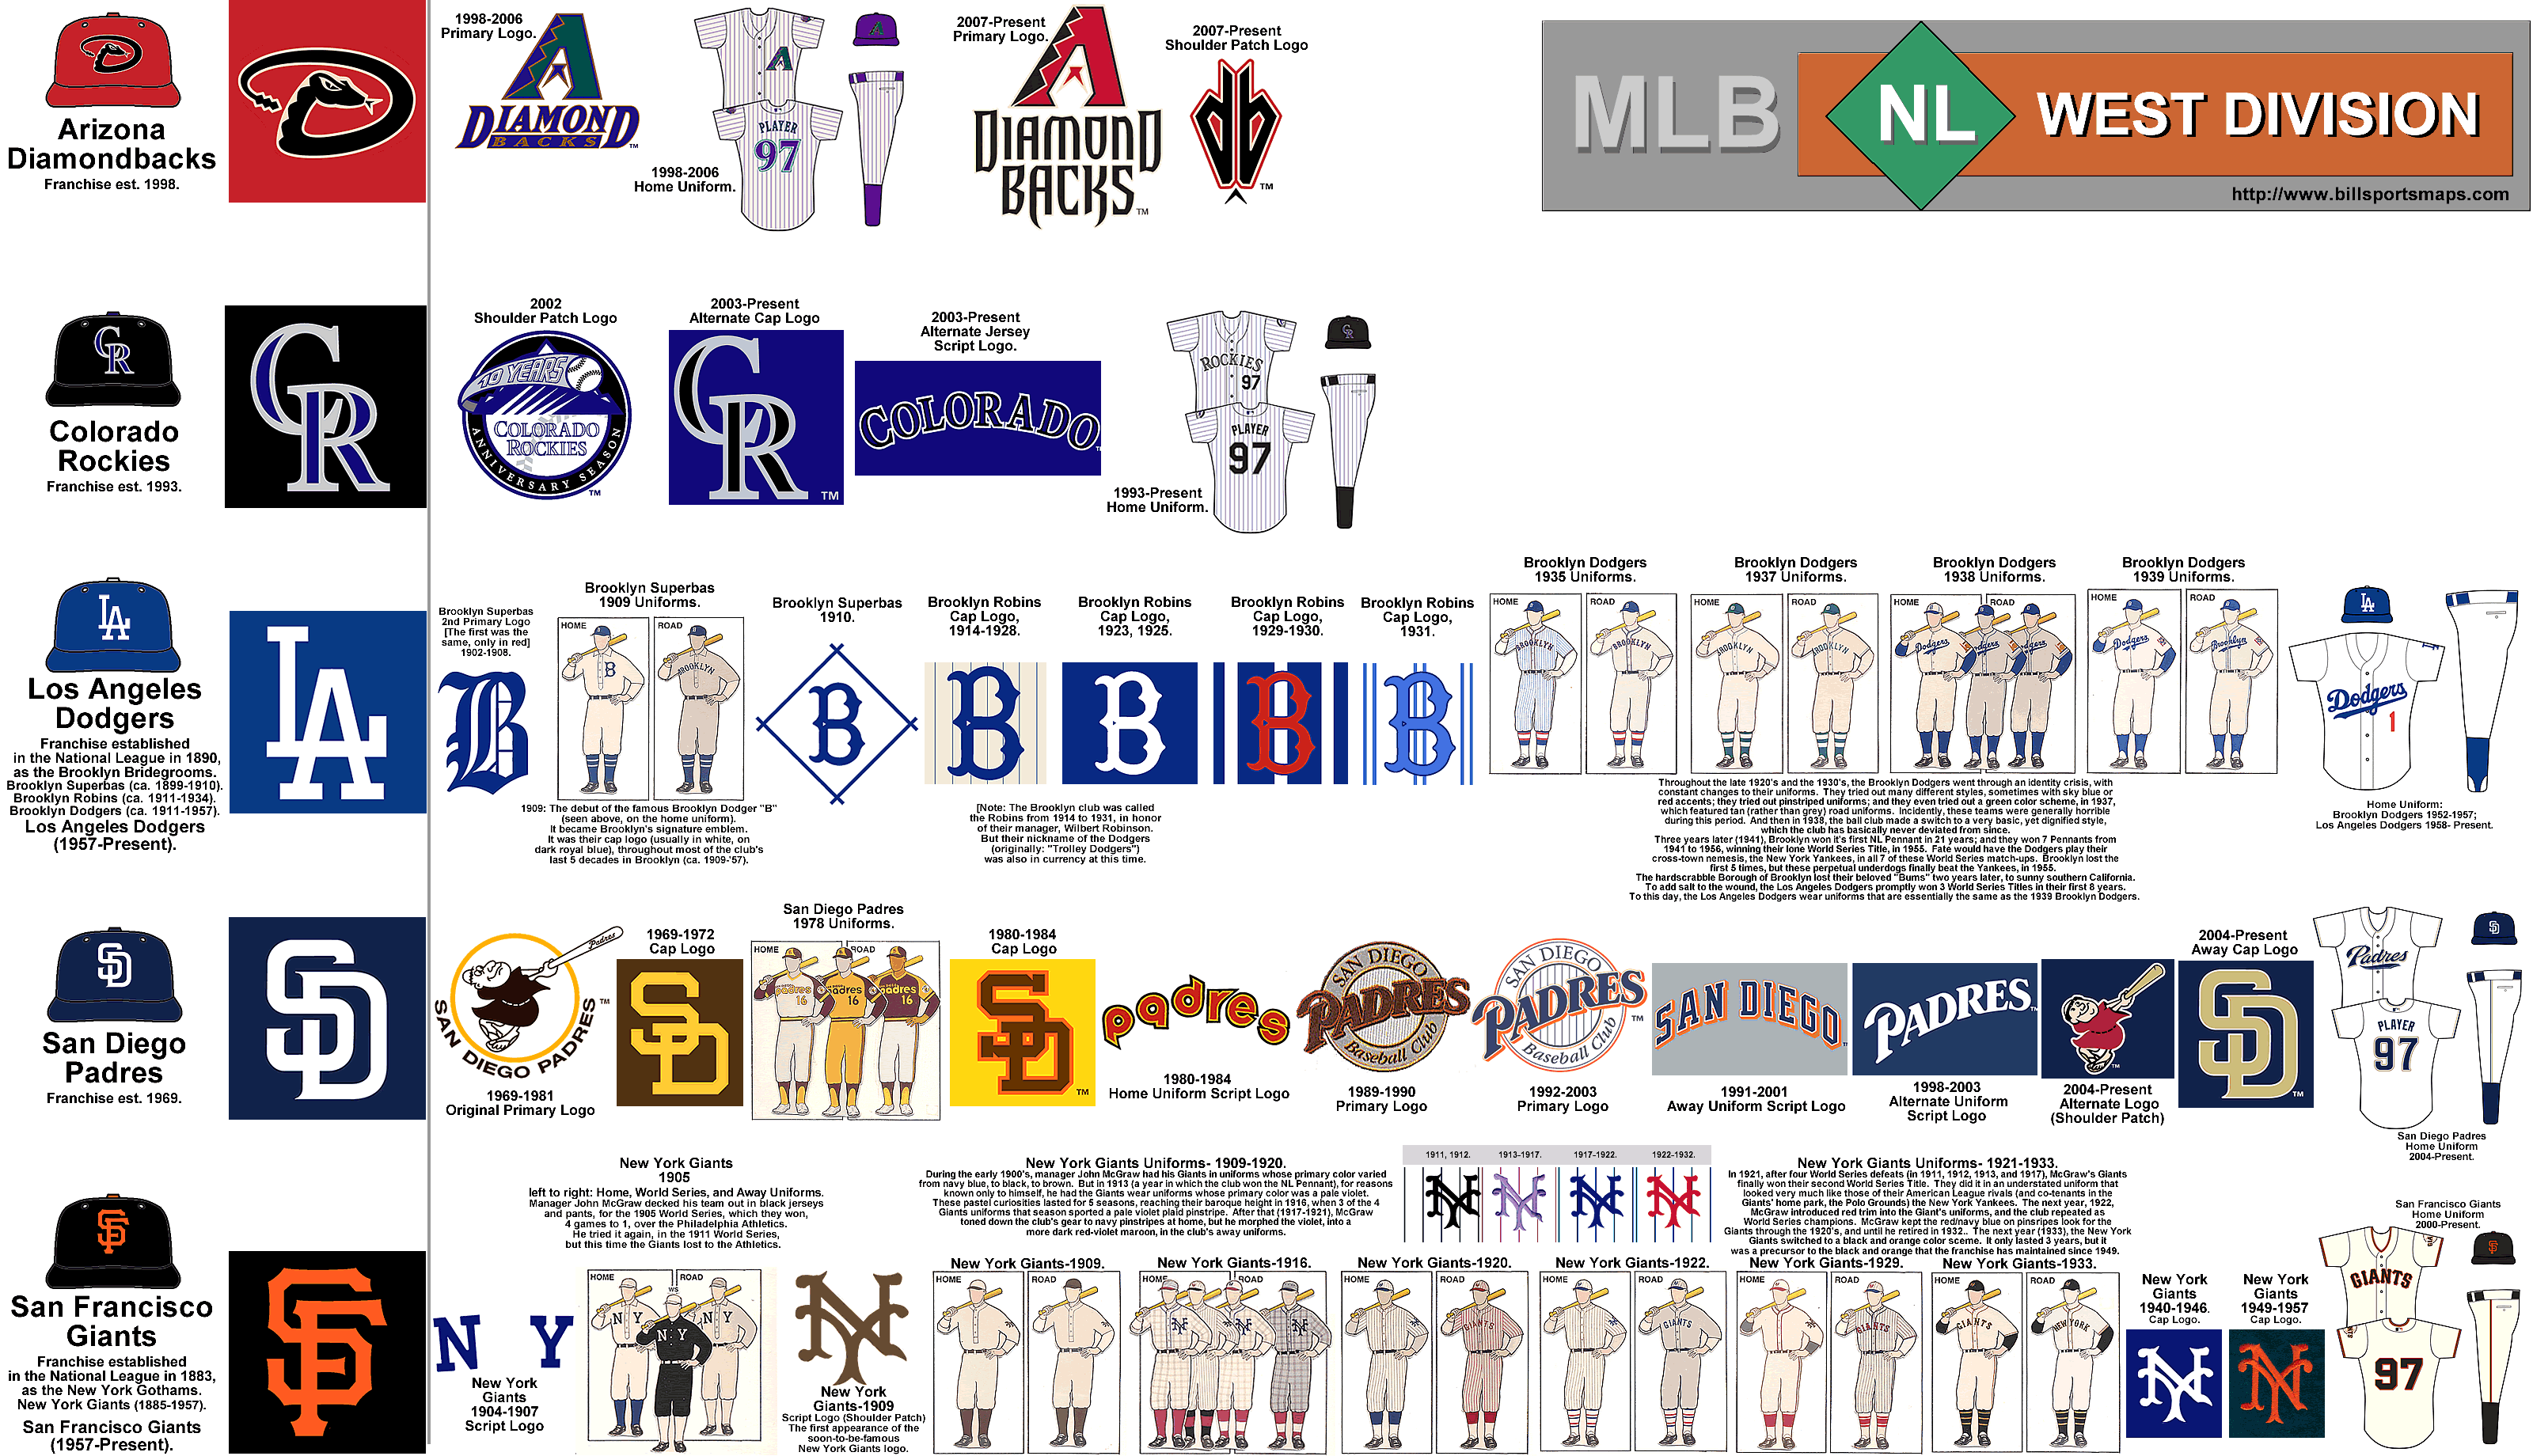 1968 MLB Location-map with Jersey-logos & Attendances, featuring